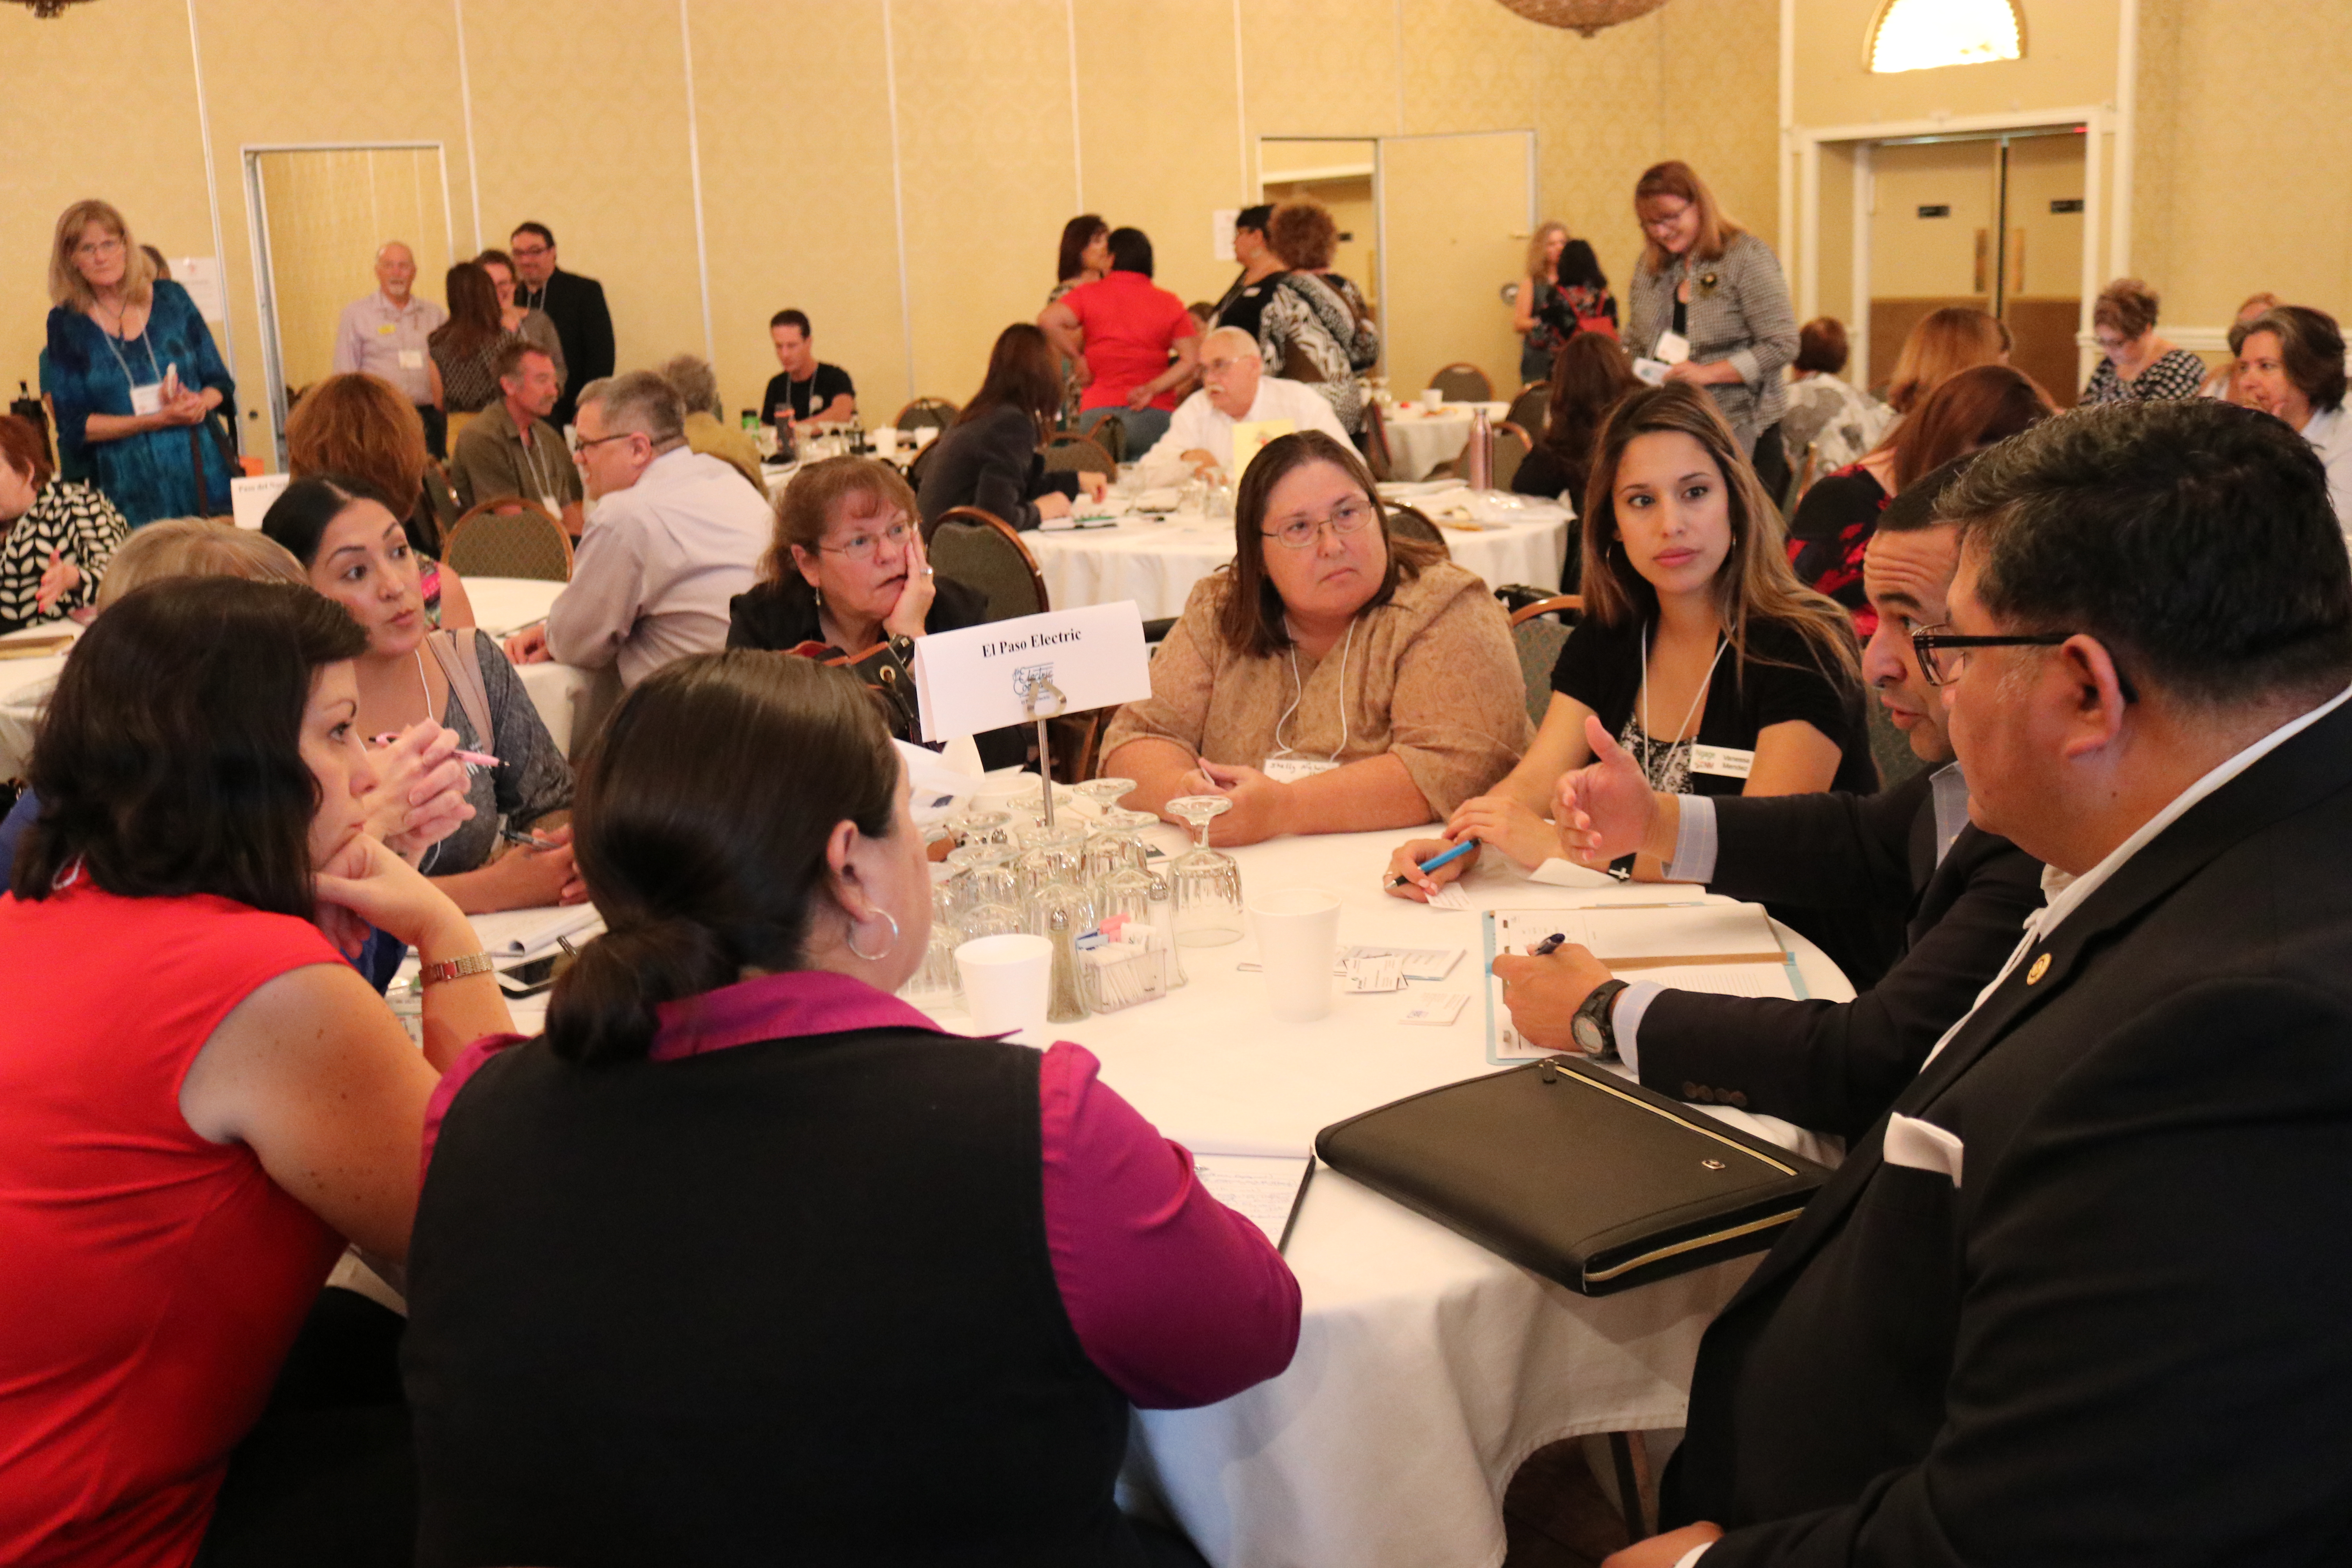 Discussion at table among group at nonprofit conference